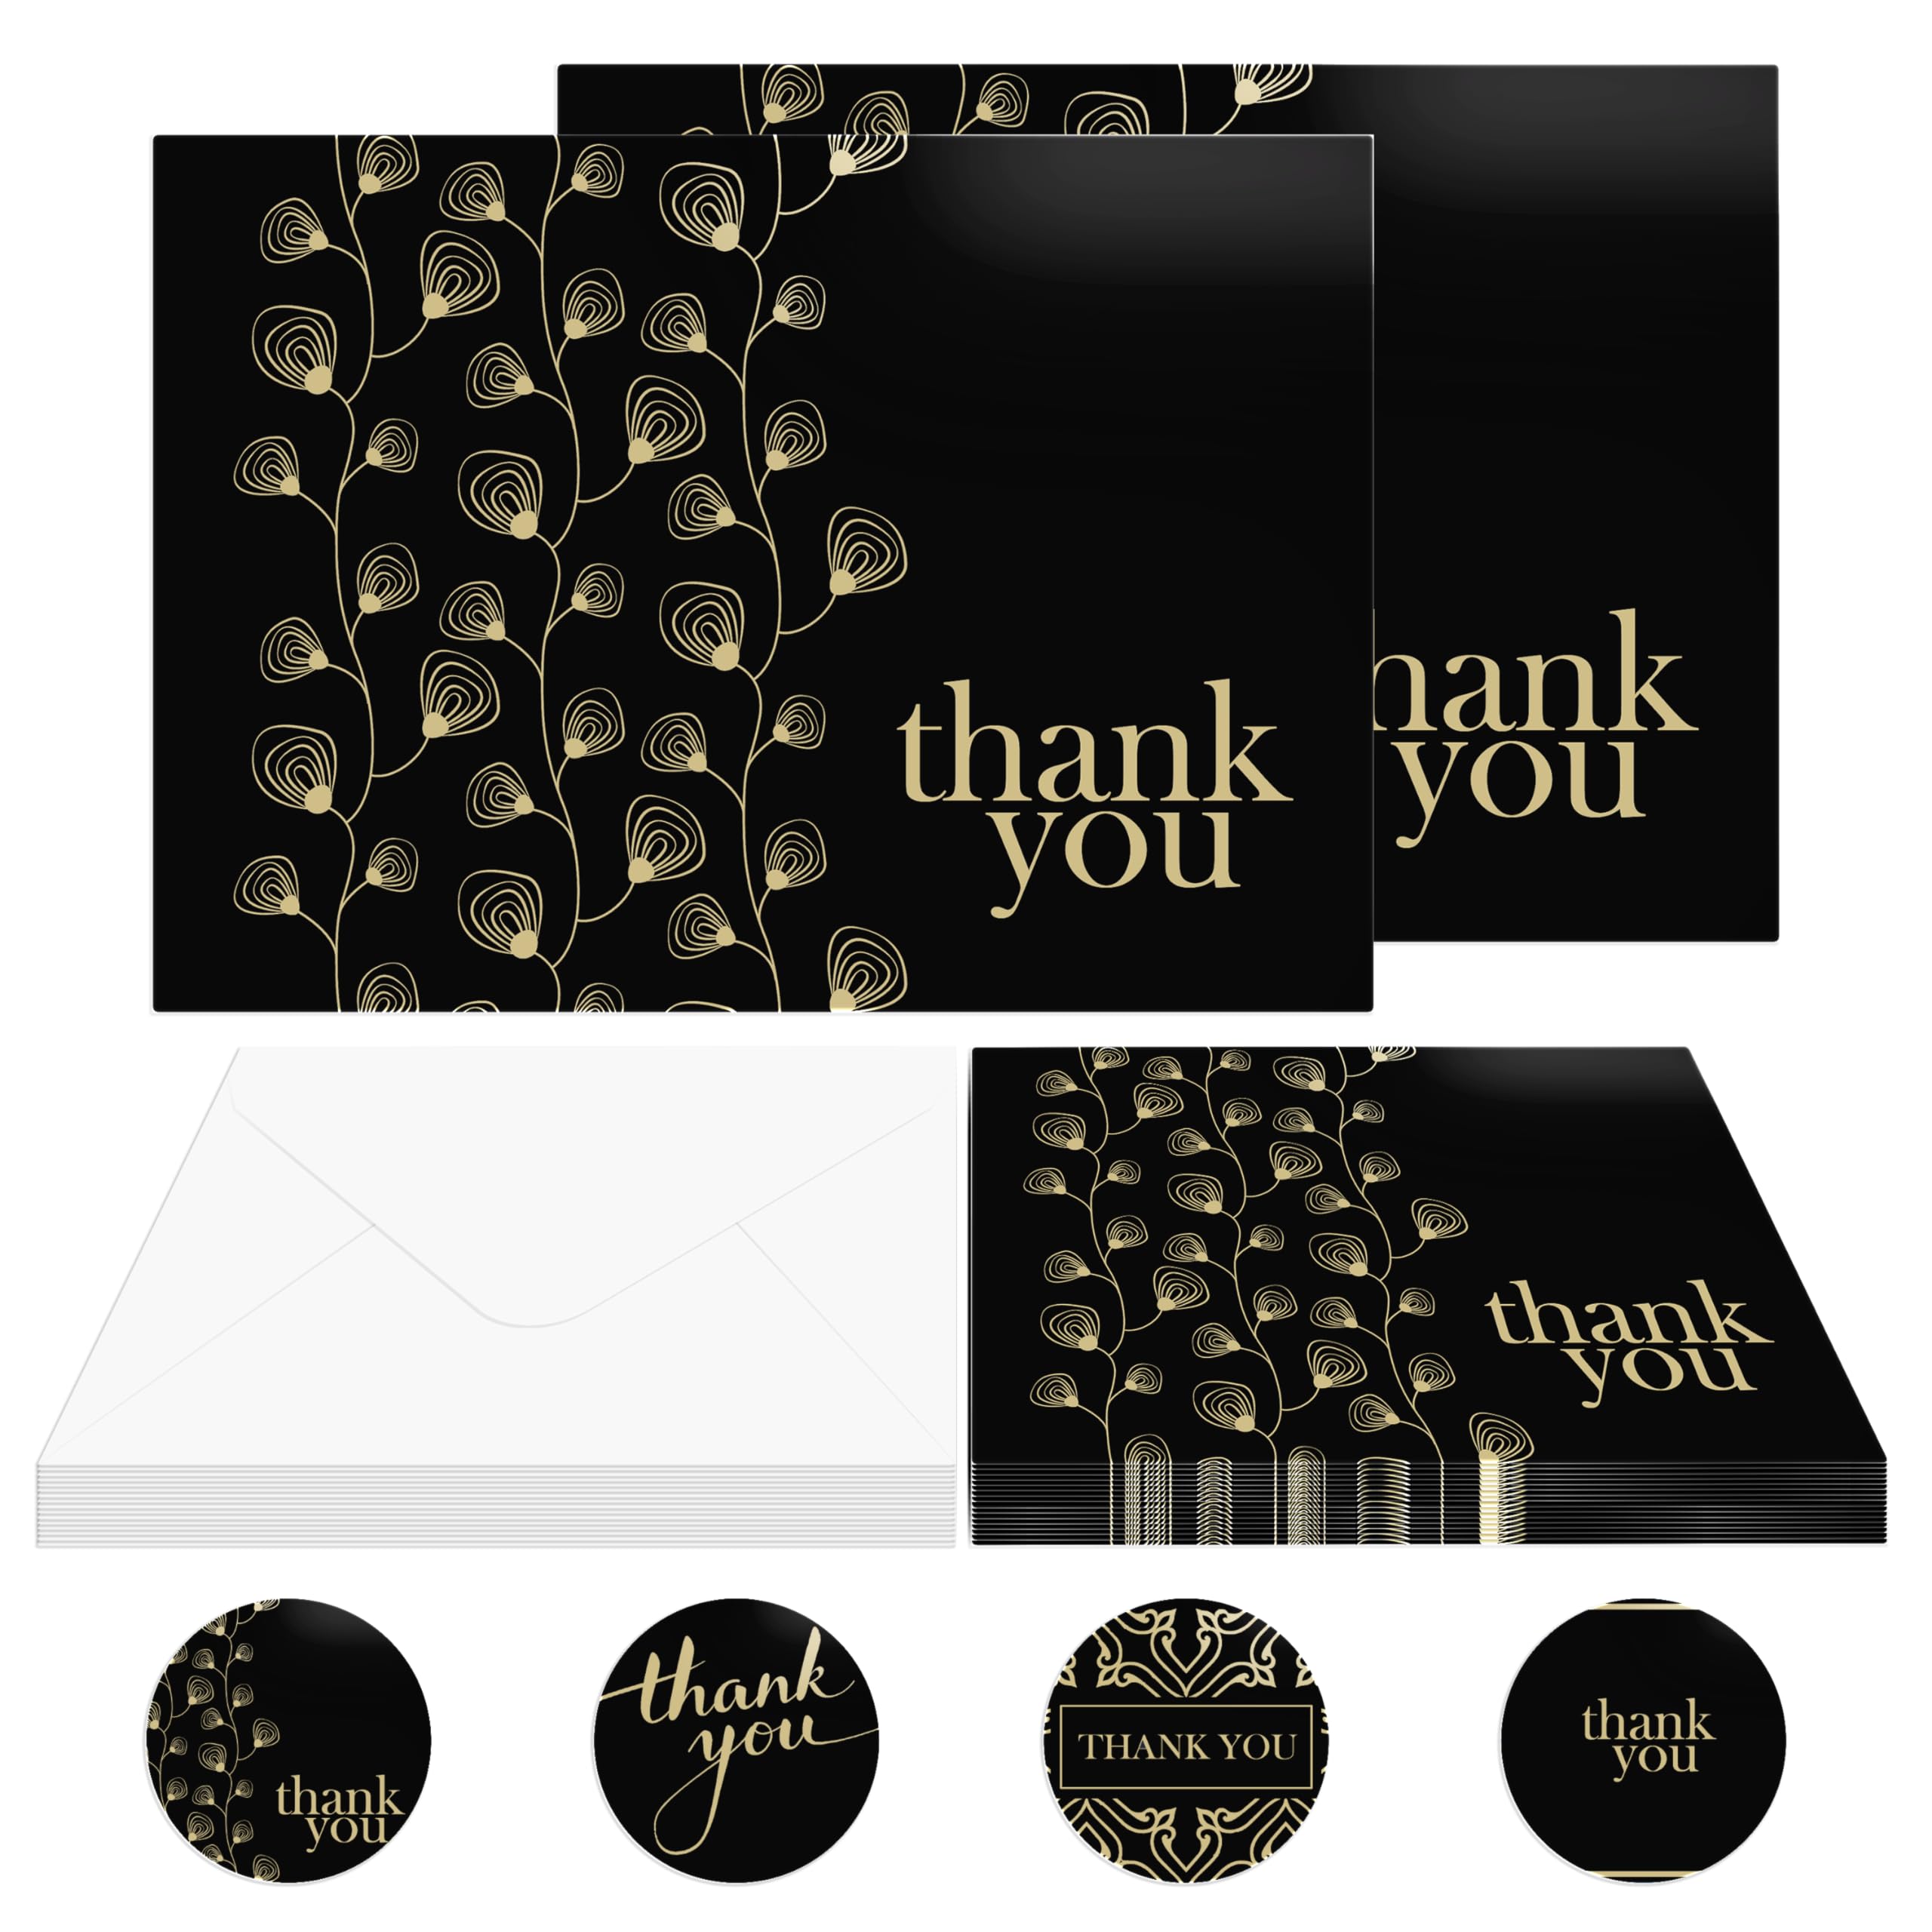 Professional thank you card